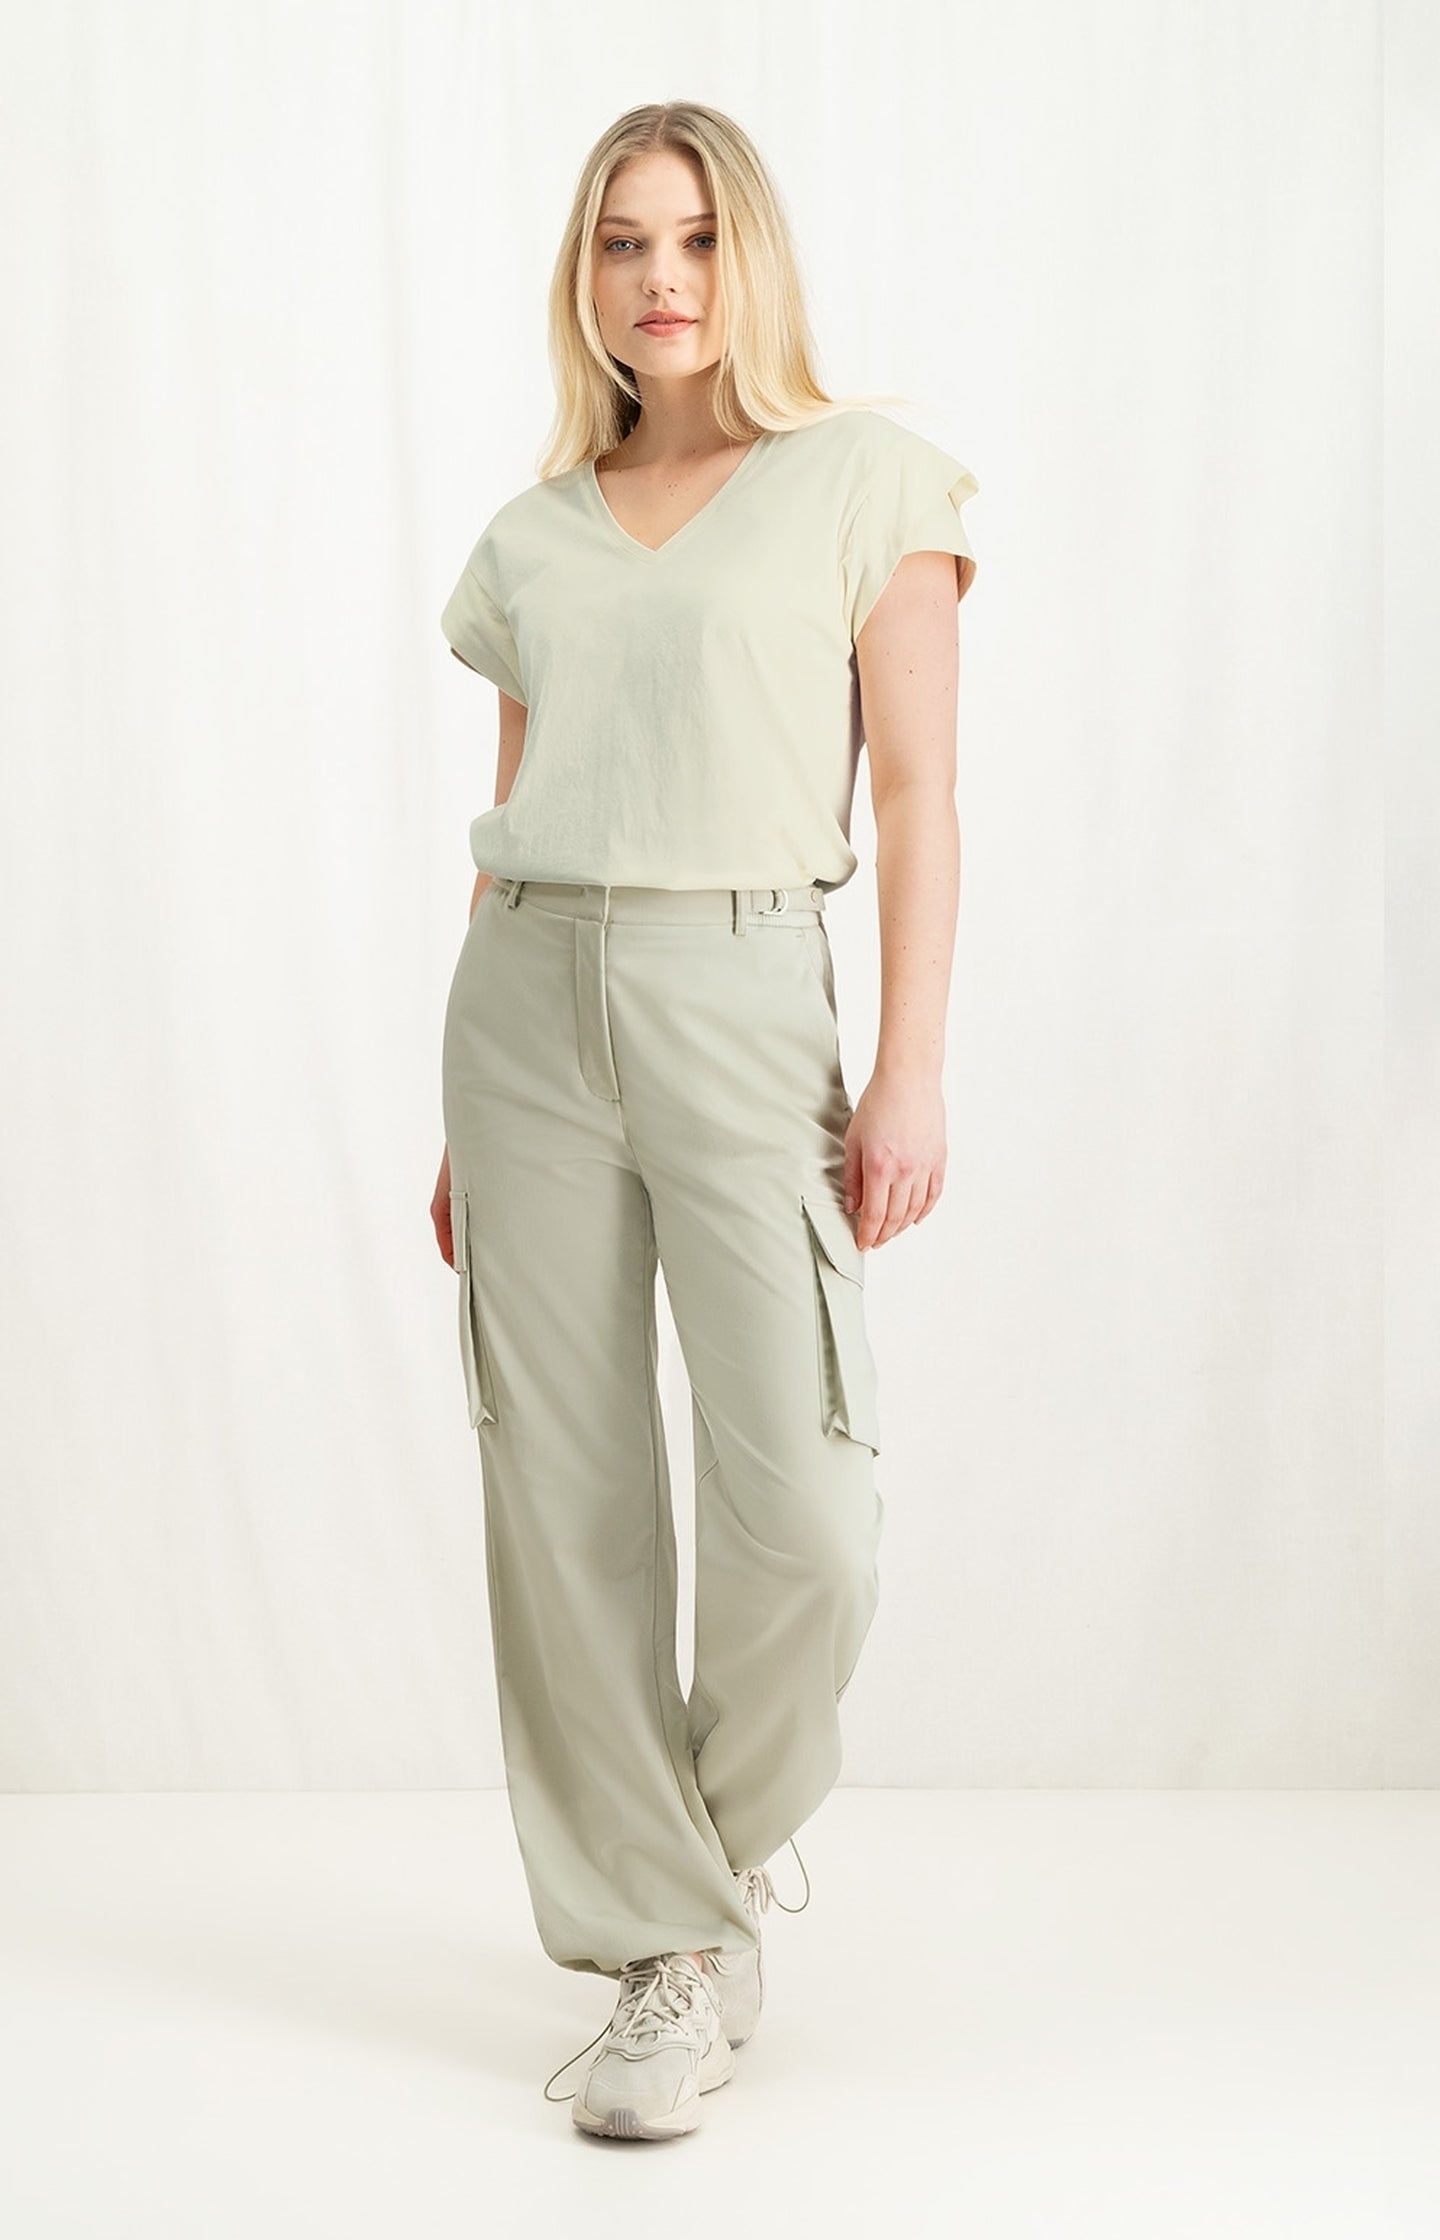 Cargo trousers with wide legs, pockets and waist details - Type: lookbook